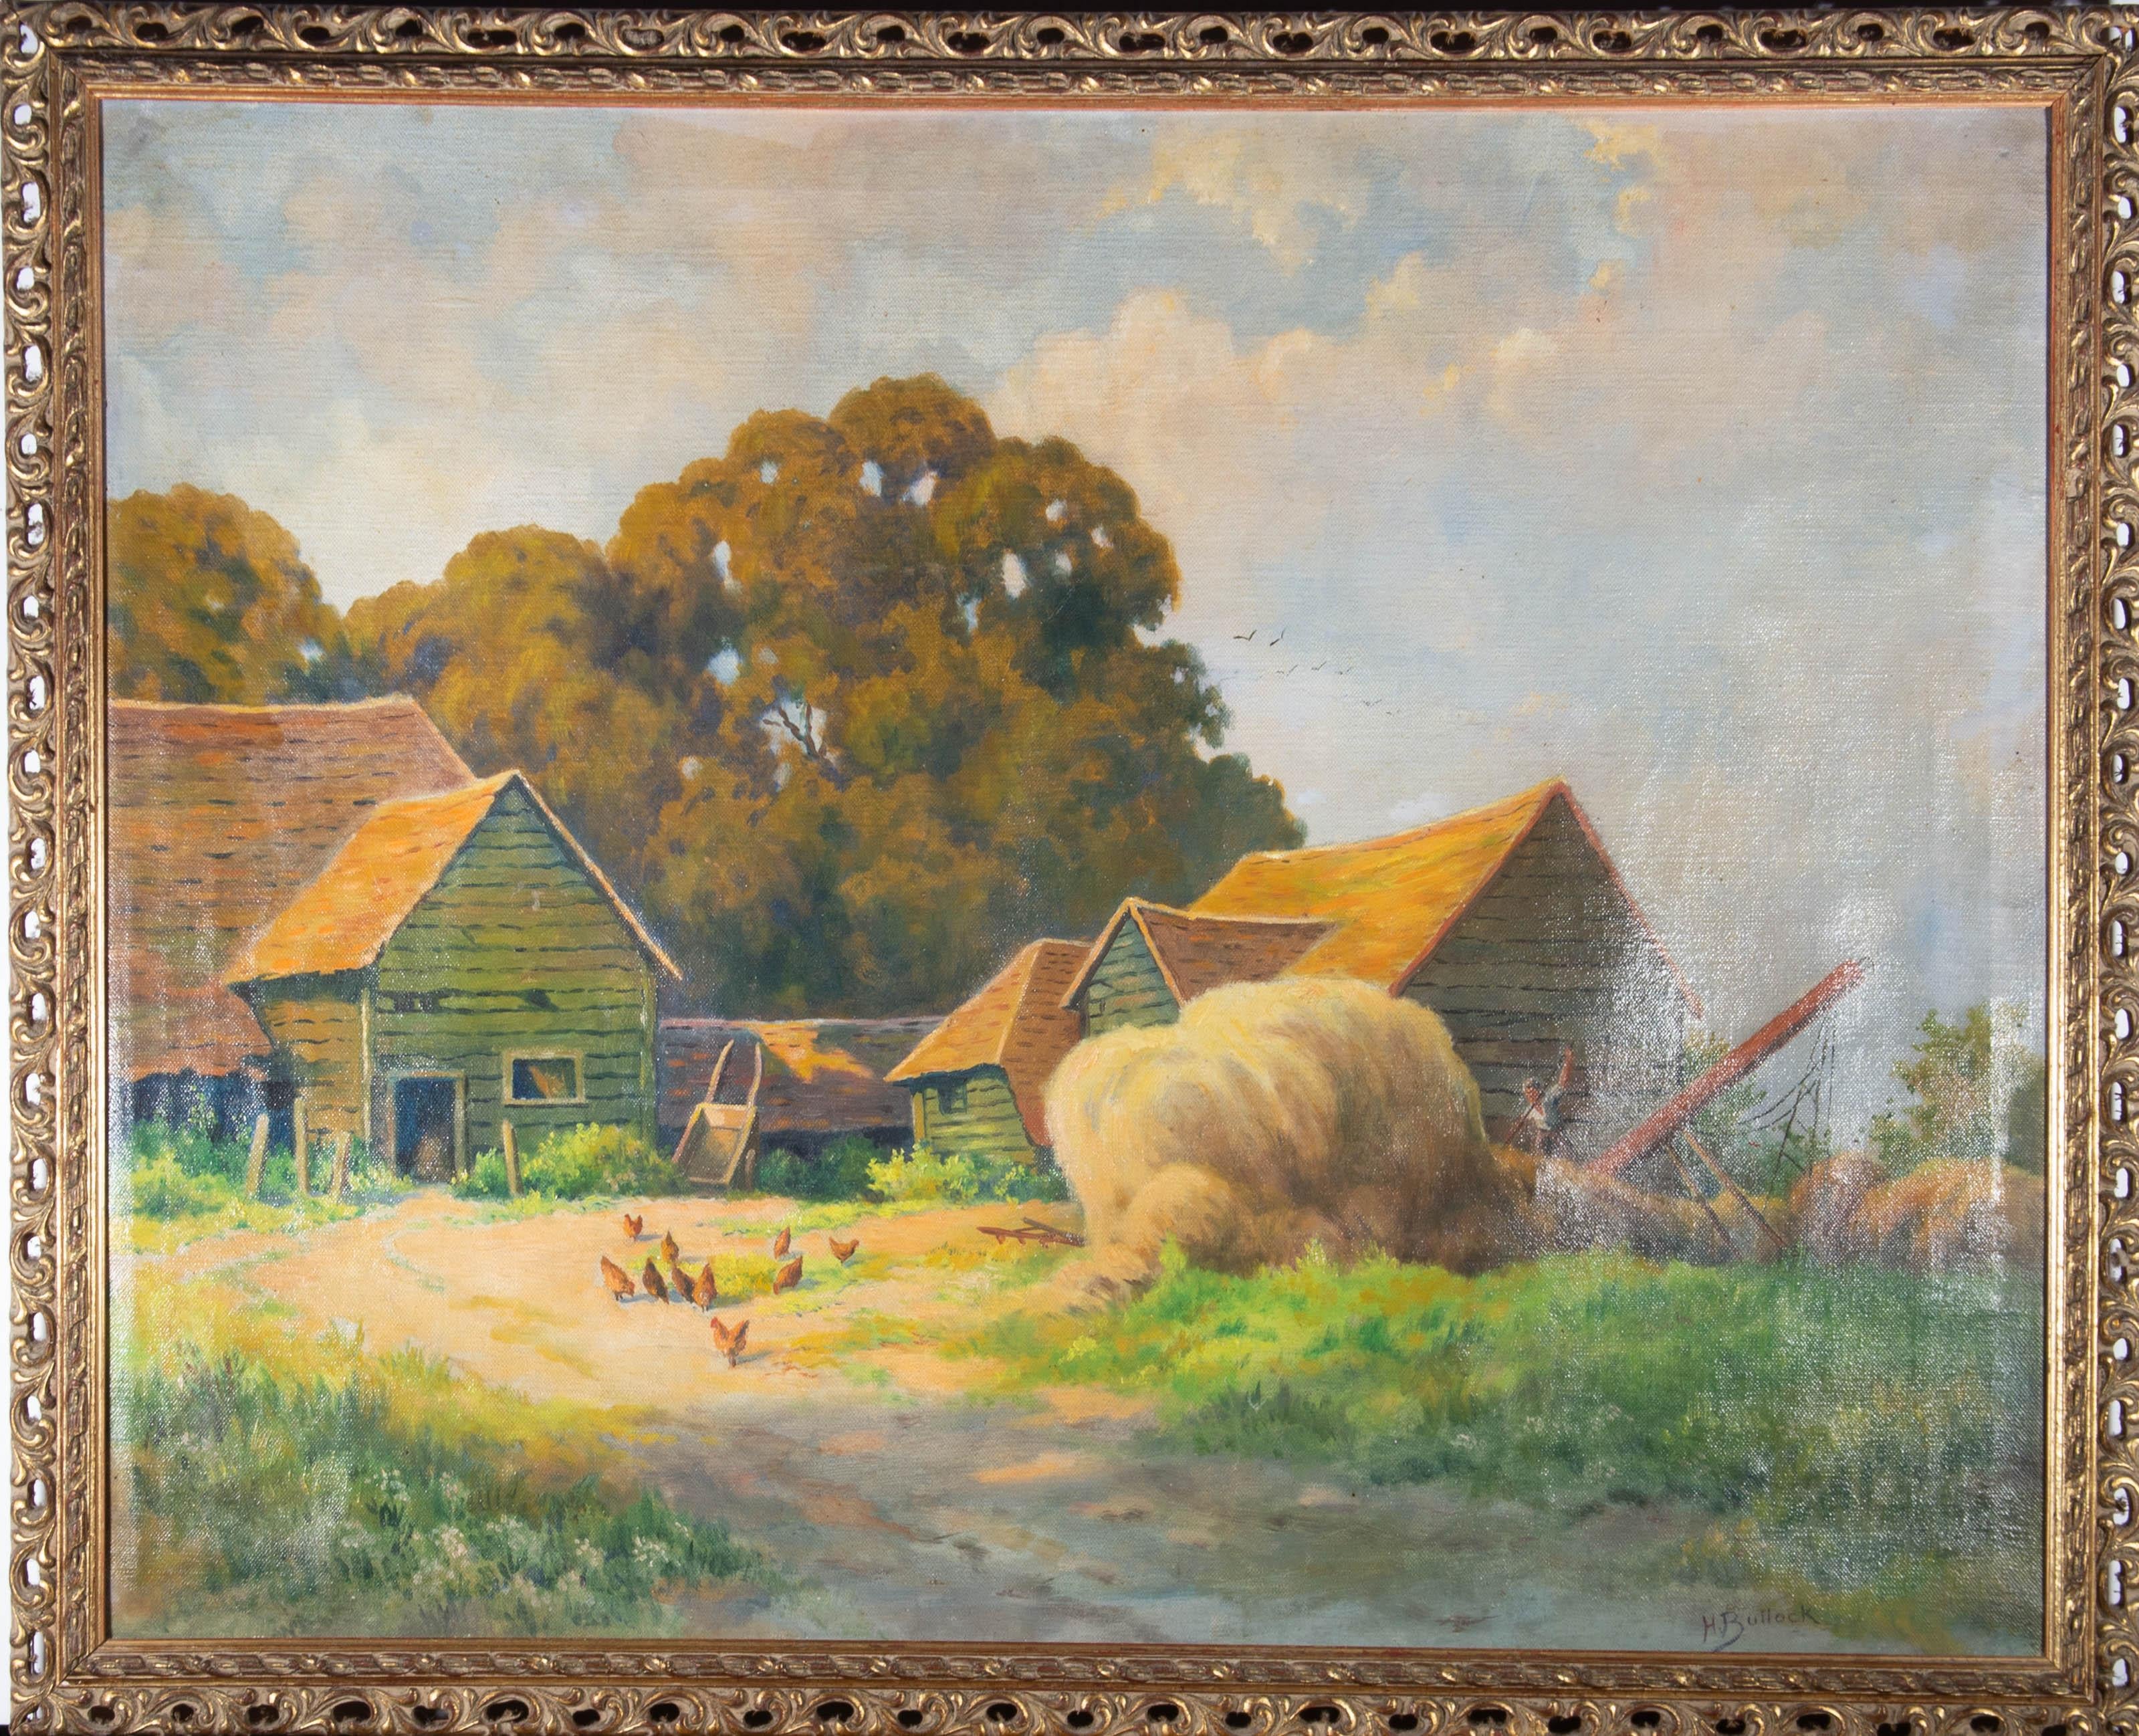 A view of a farmyard on a summer's day. Presented in a distressed pierced gilt-effect wooden frame. Signed to the lower-right edge. On canvas on stretchers.
